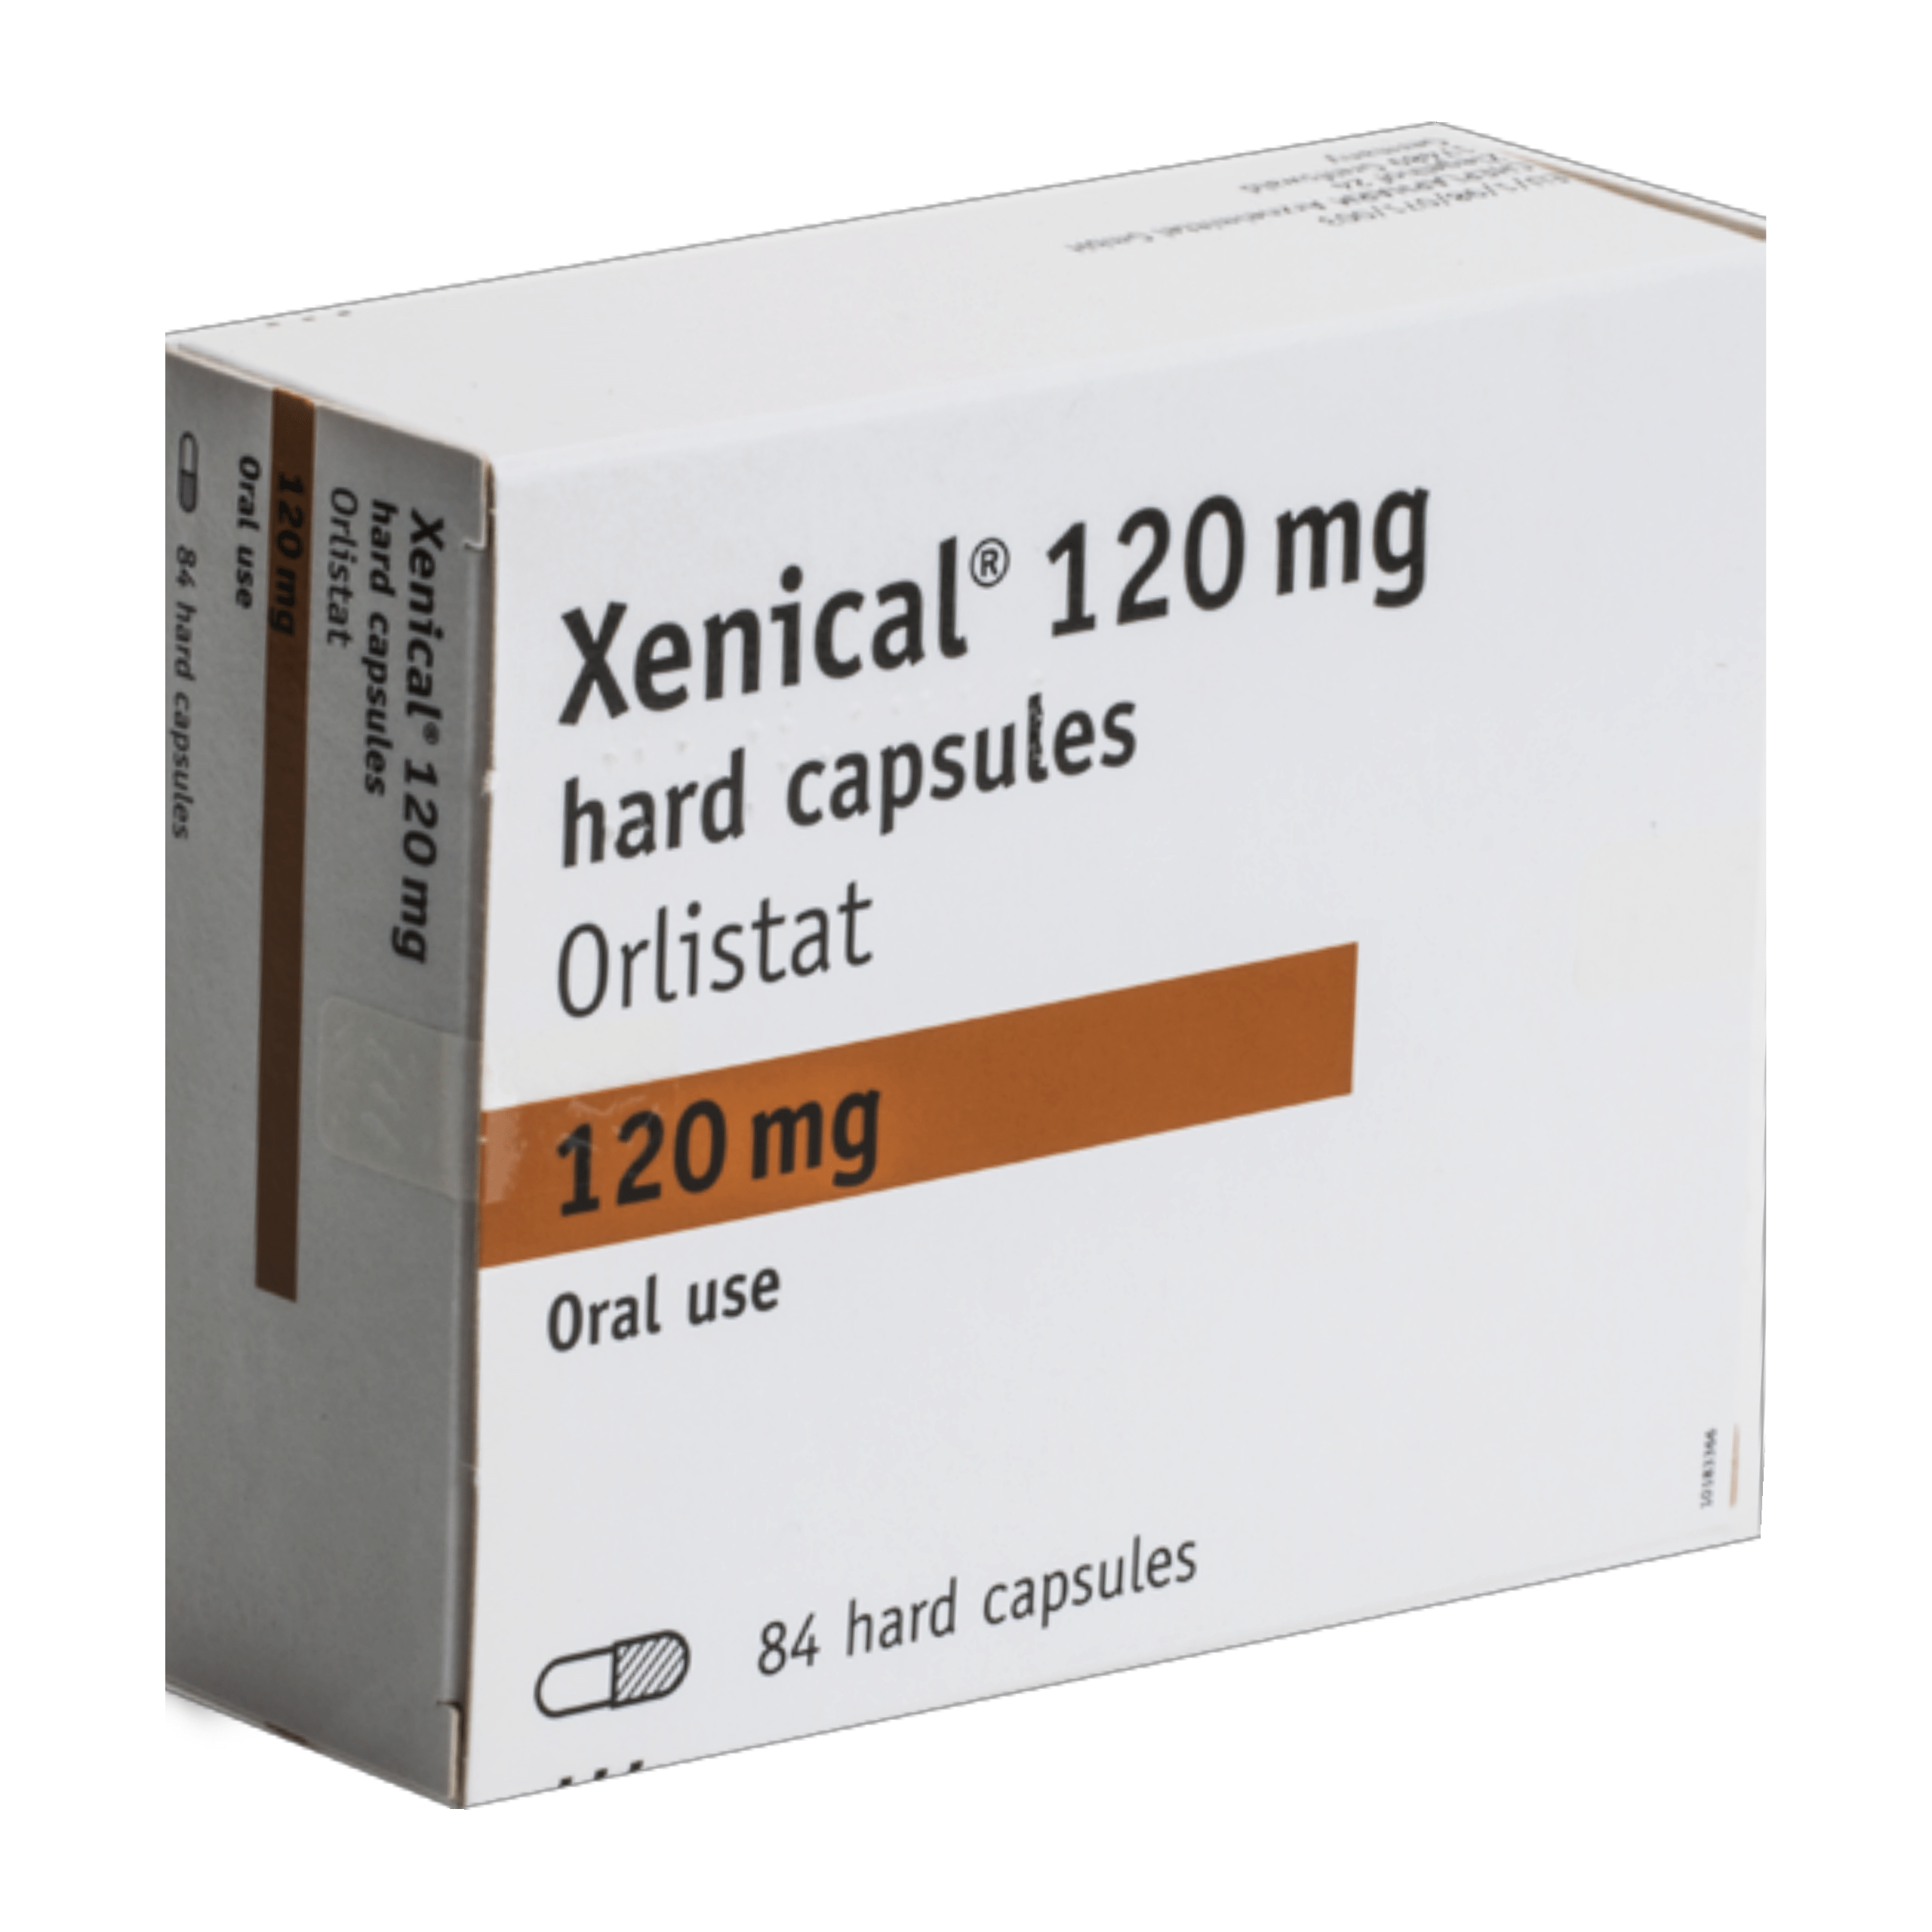 Xenical - 120mg capsules